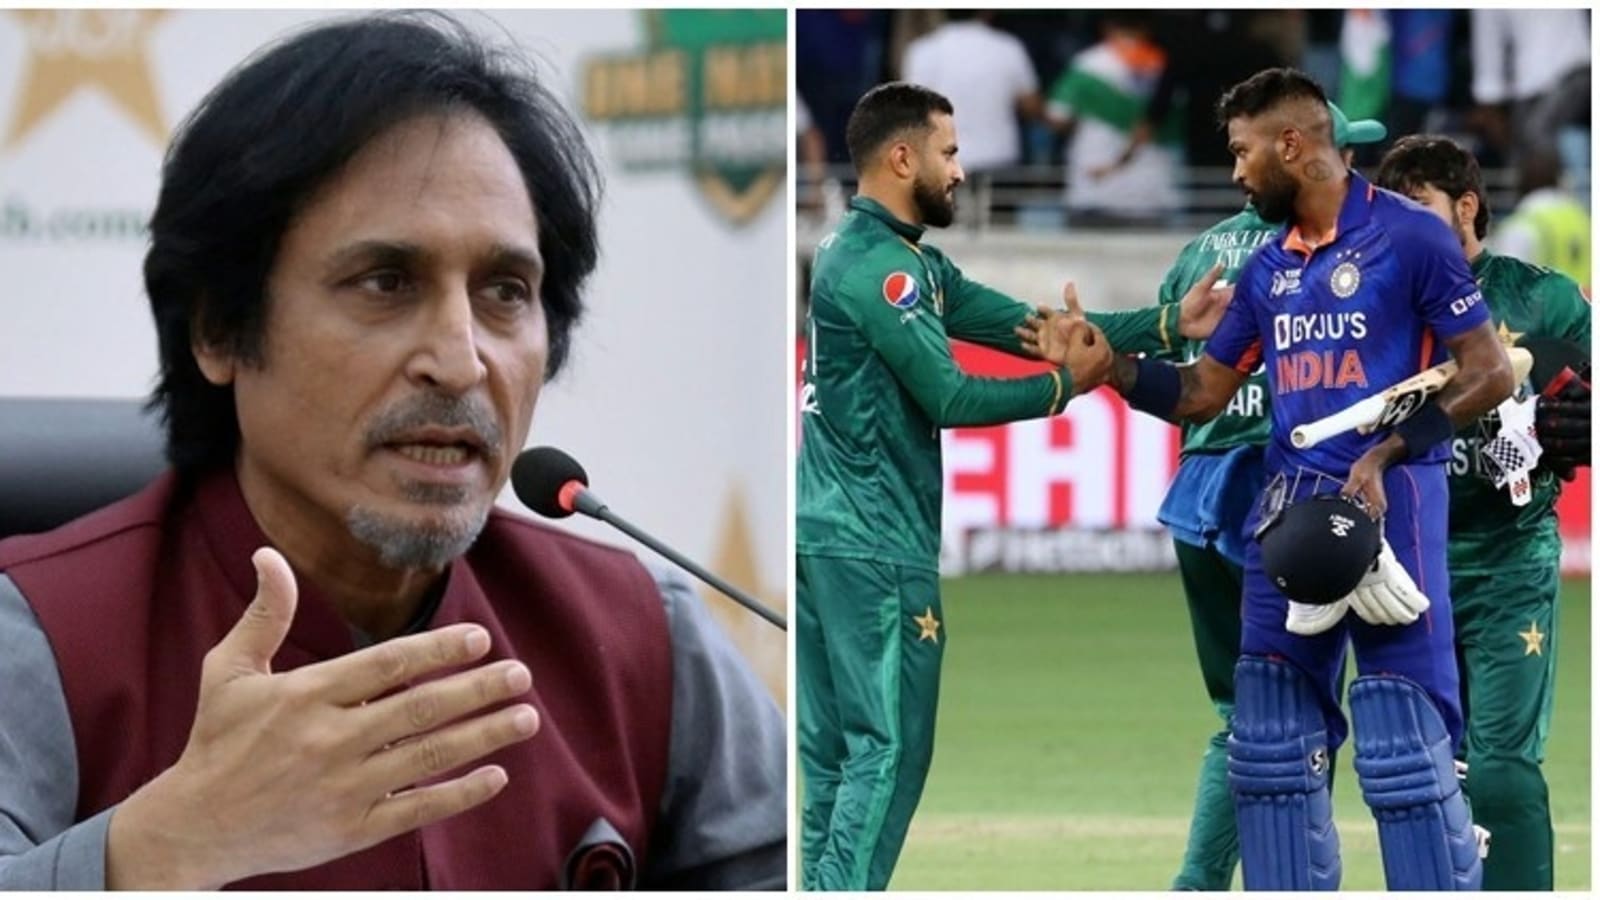 Ramiz Rajas old PAK cricket can collapse without INDs support clip go viral Cricket